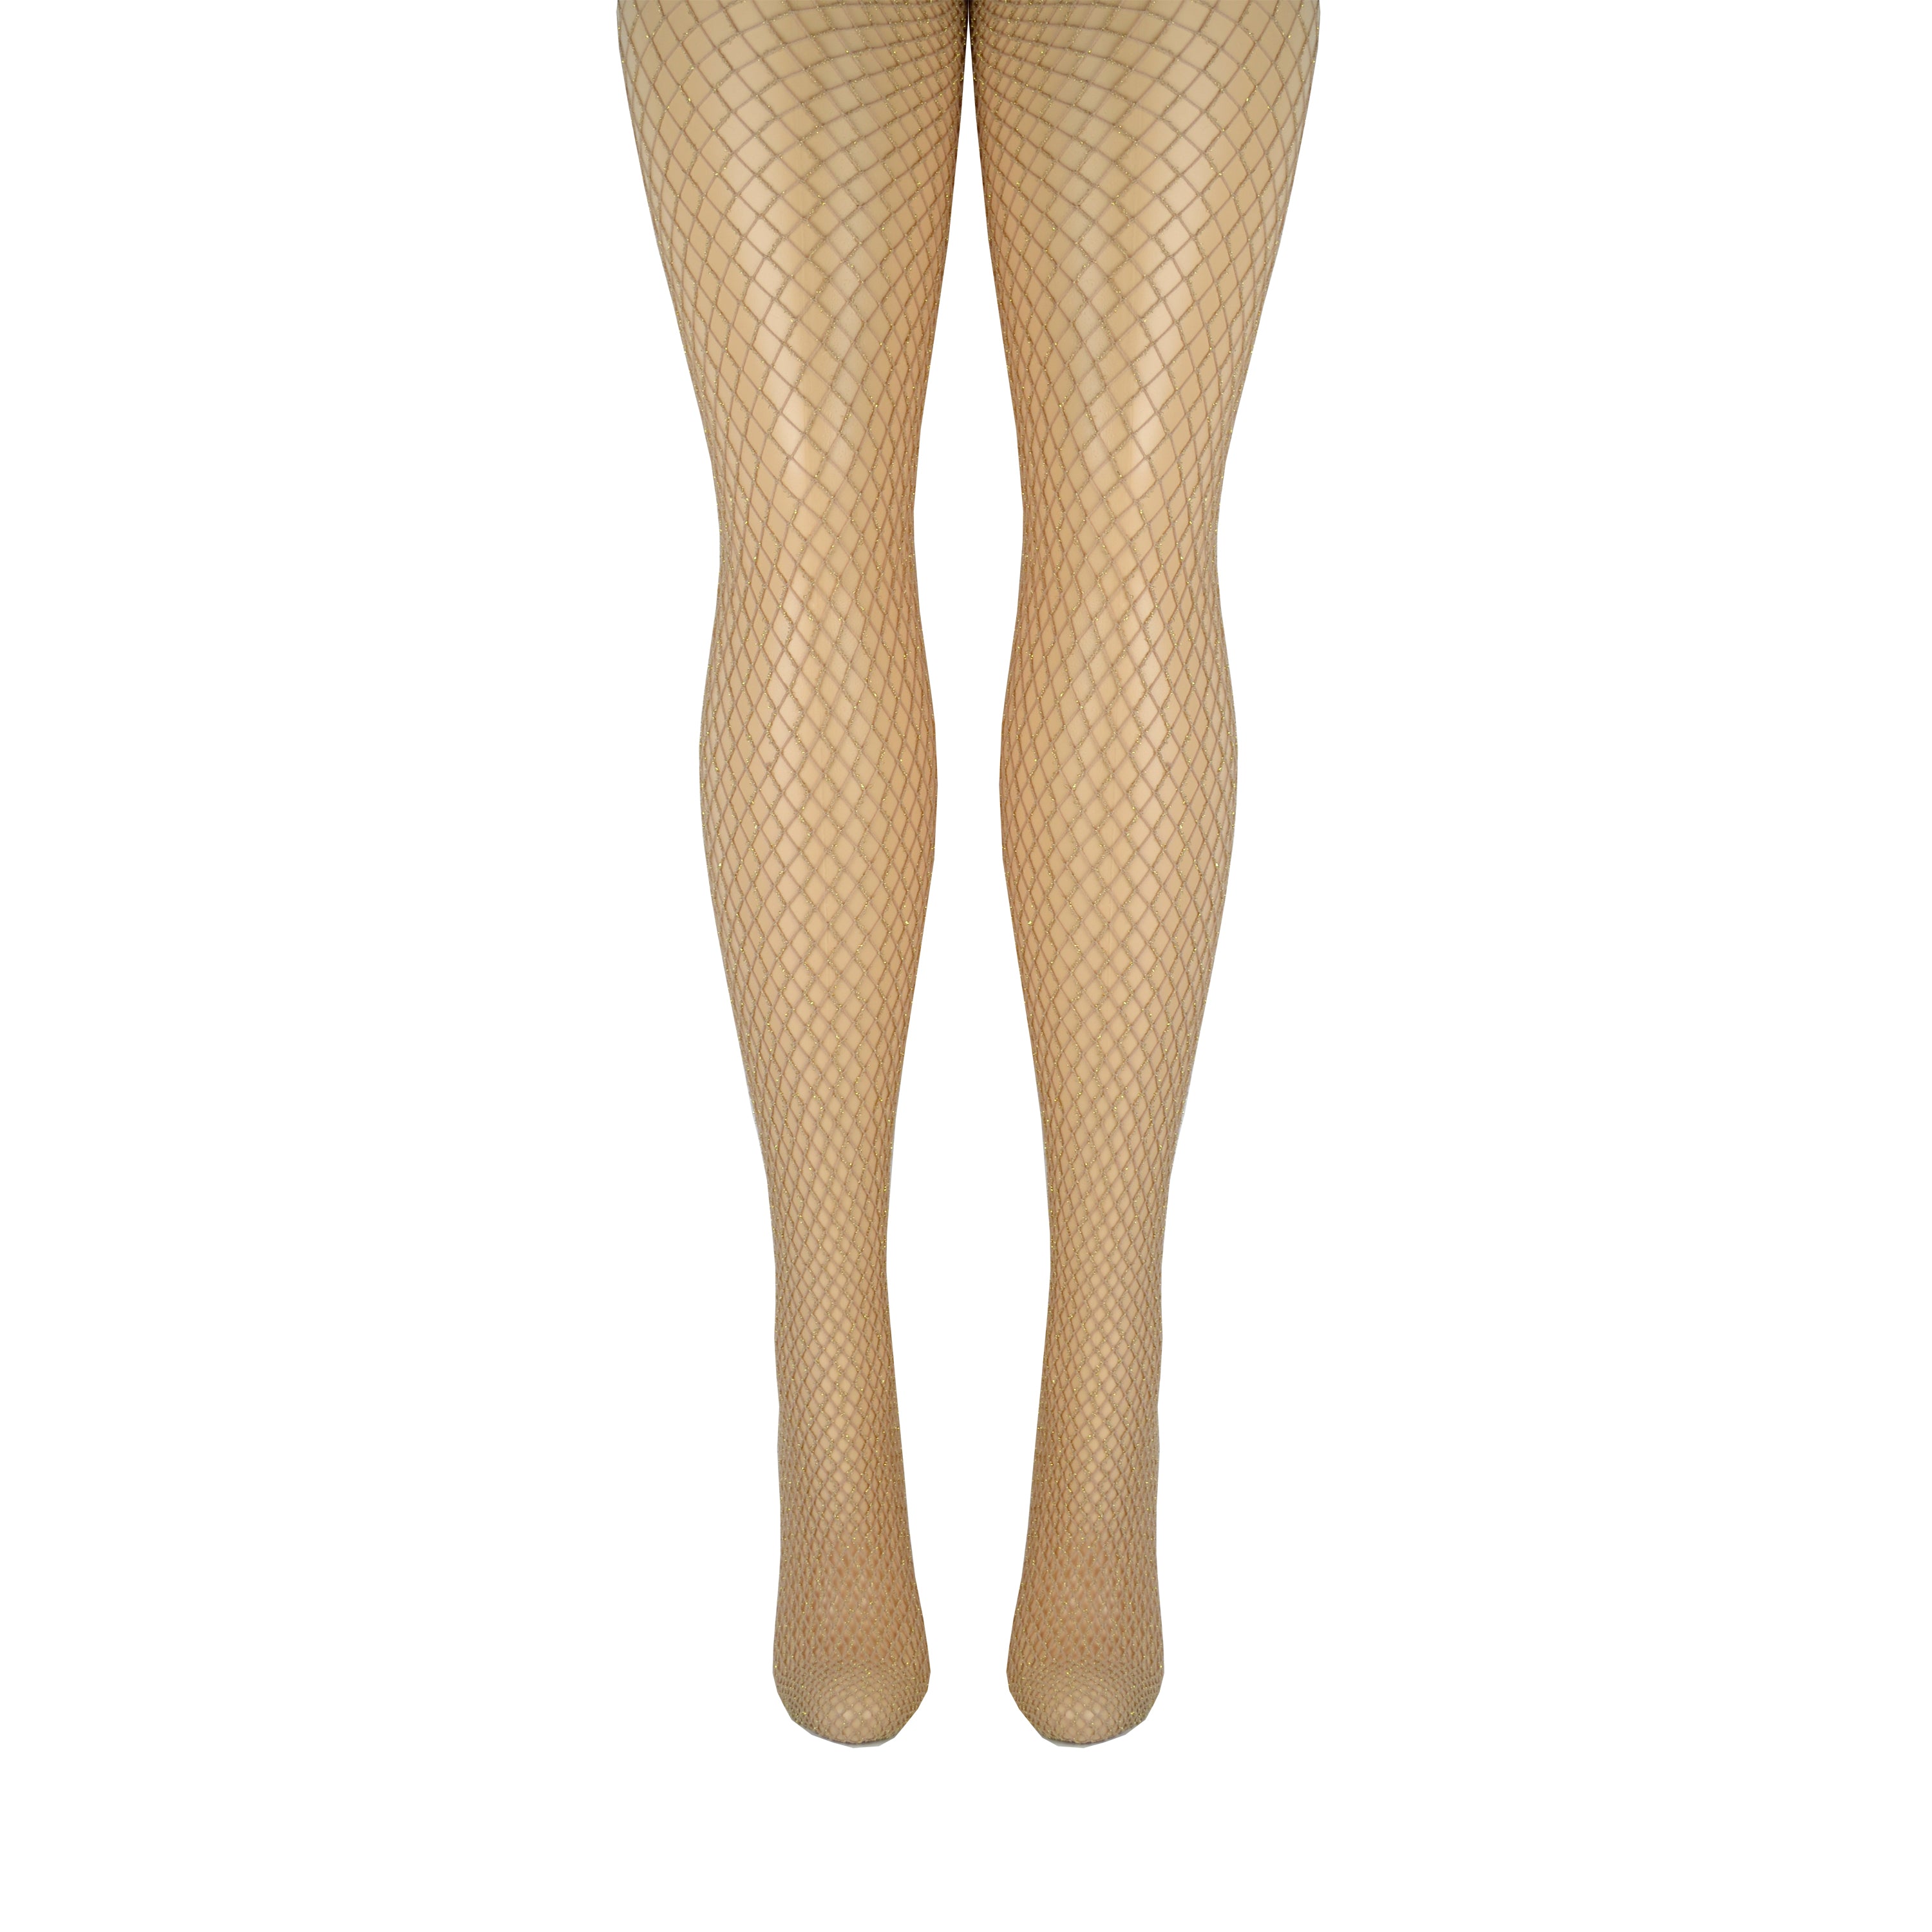 Shown from the front, a pair of nylon MeMoi nude fishnets with a gold glitter thread running throughout.